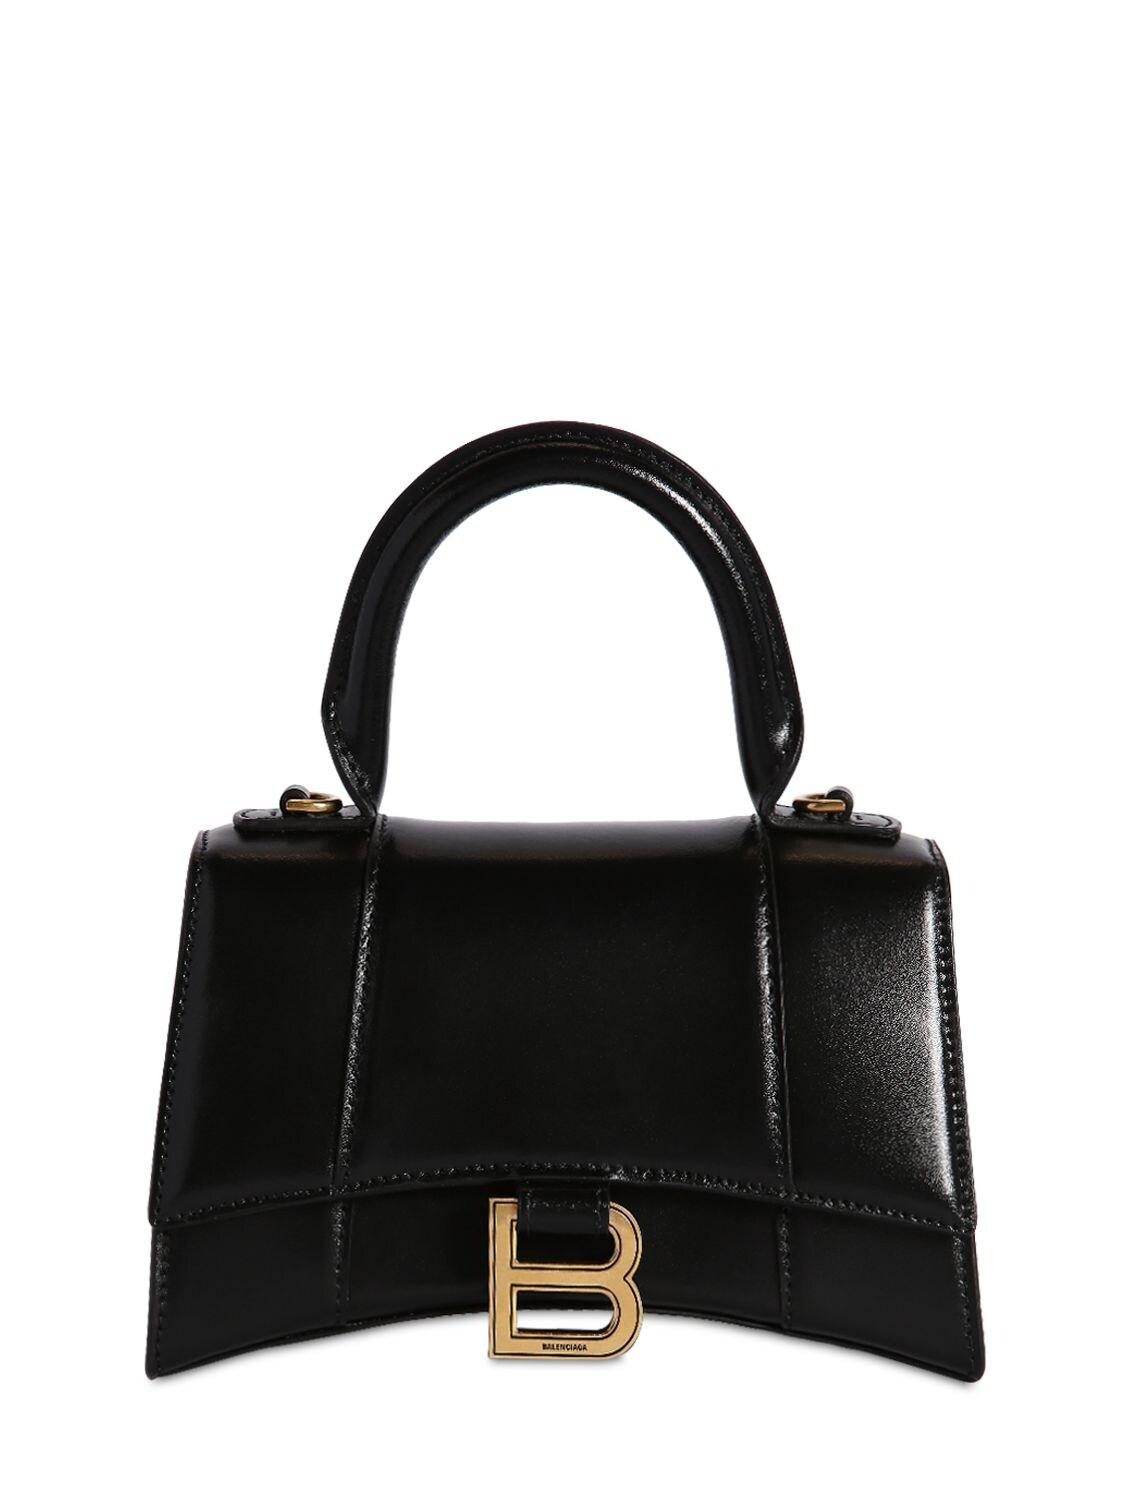 Balenciaga Xs Hourglass Smooth Leather Bag in Black | Lyst